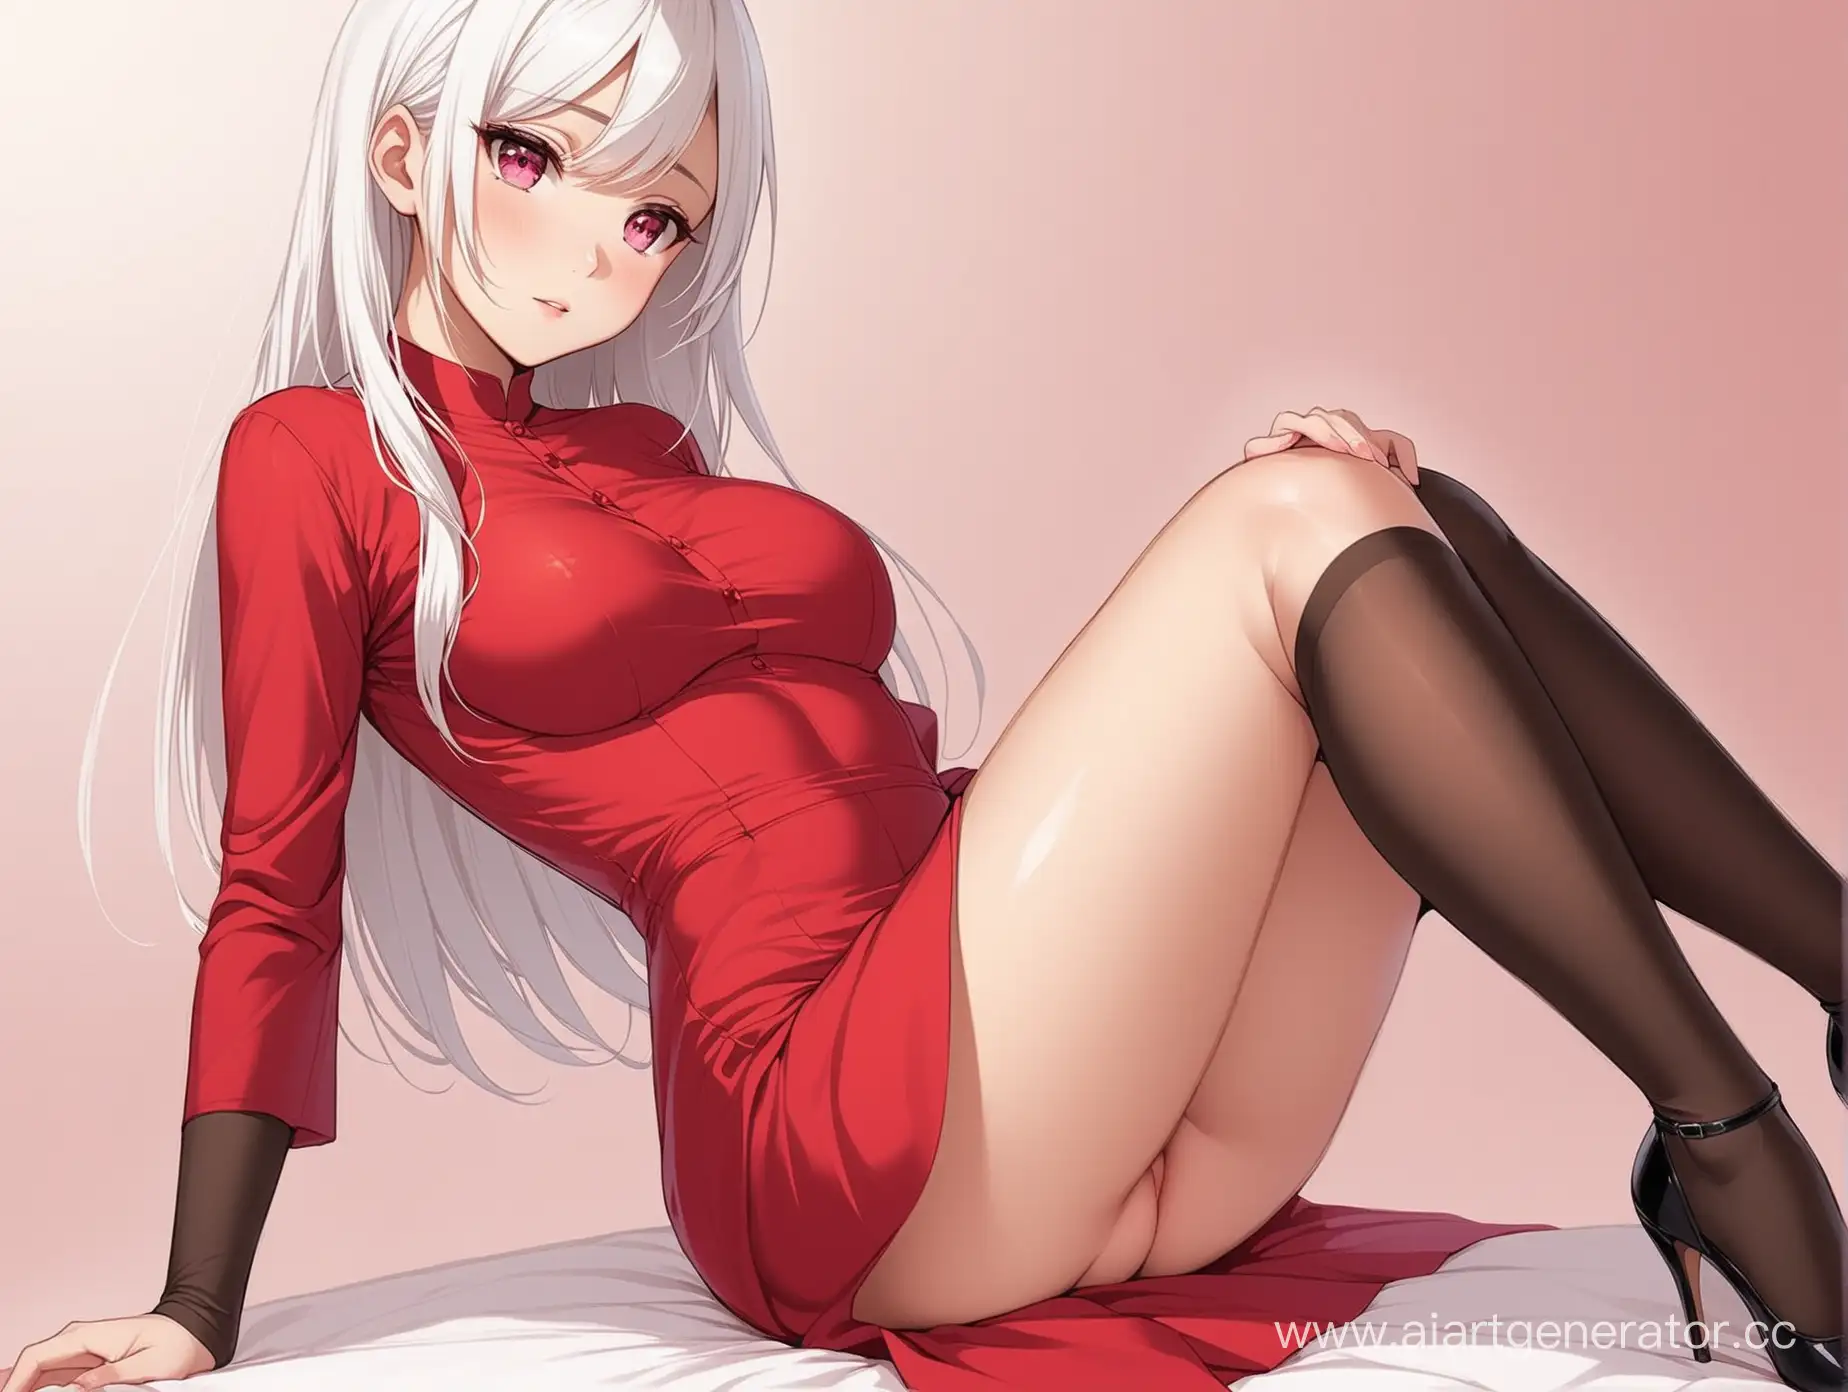 Sensual-Woman-in-Red-Dress-with-White-Hair-and-Pink-Eyes